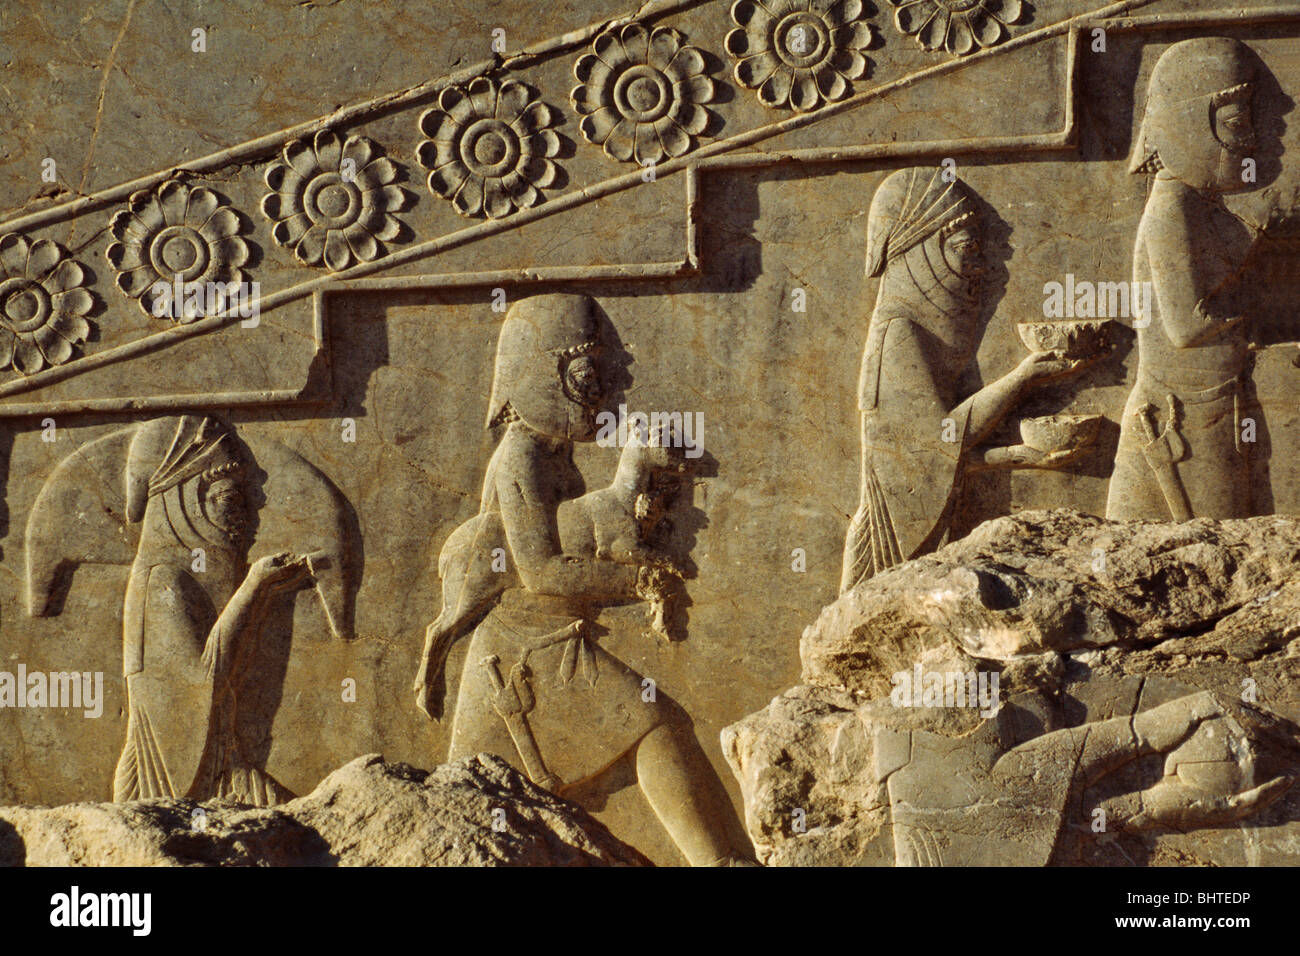 Relief sculpture vassals presenting gifts to honor ancient Persian rulers, Persepolis, Iran Stock Photo